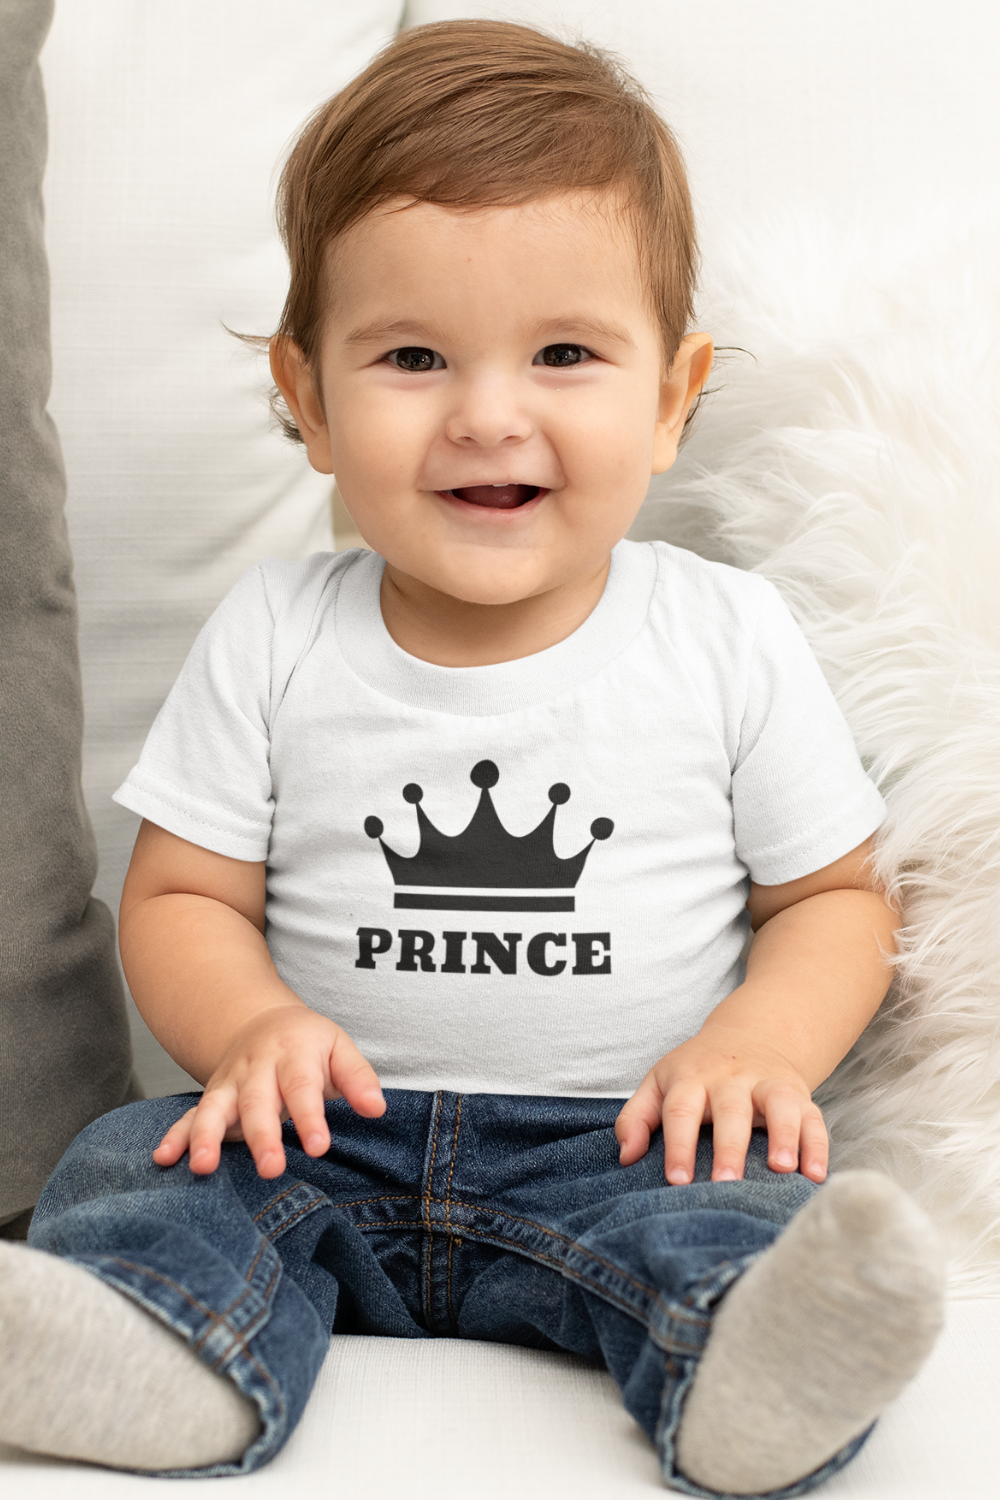 Baby Prince T-Shirt (100% Cotton) | Royal Family Collection